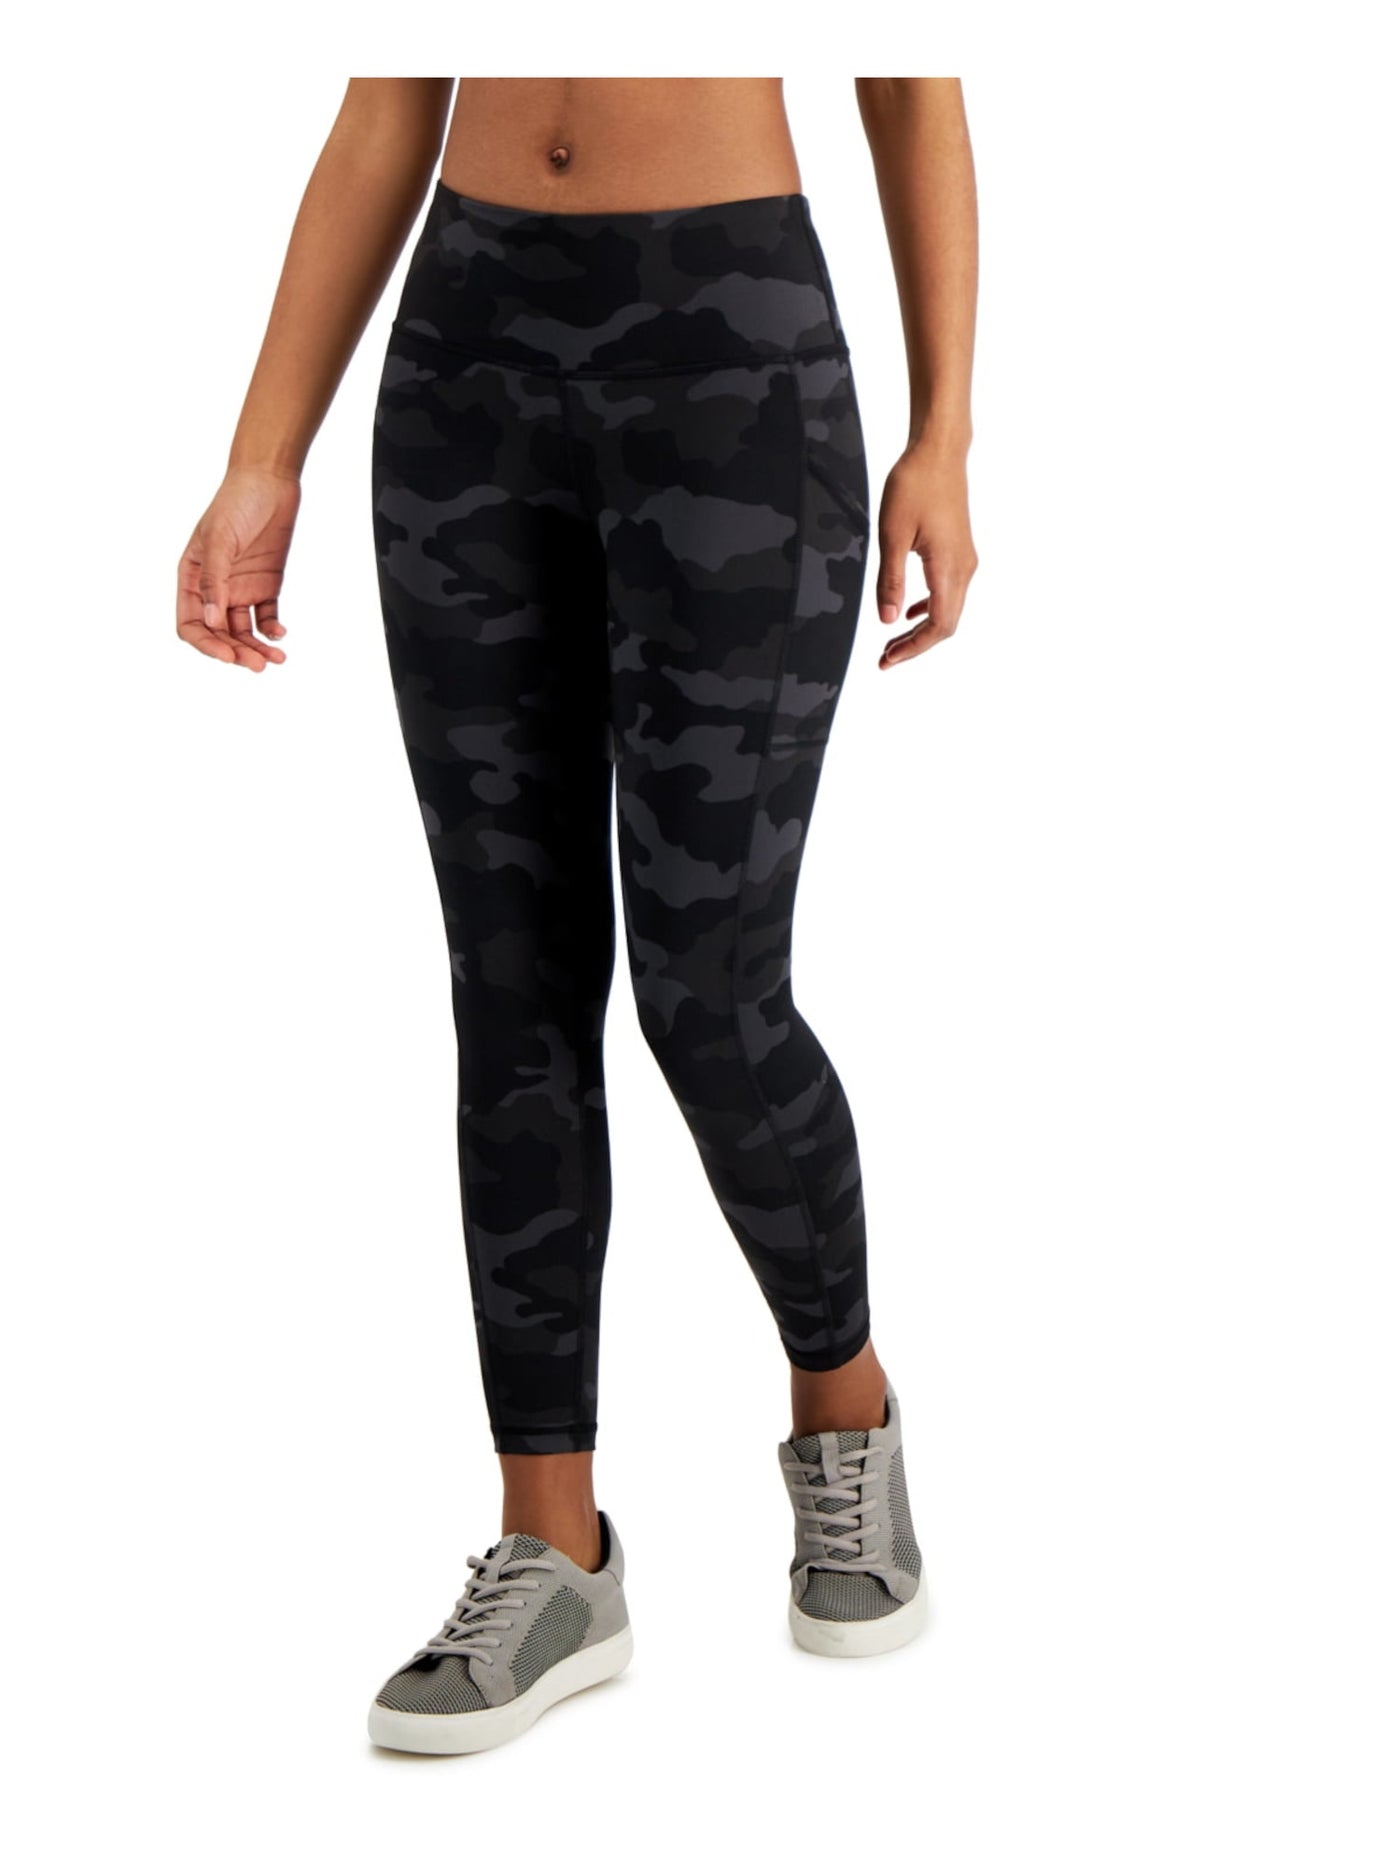 IDEOLOGY Womens Black Pocketed Ankle Length Camouflage Active Wear Skinny Leggings S